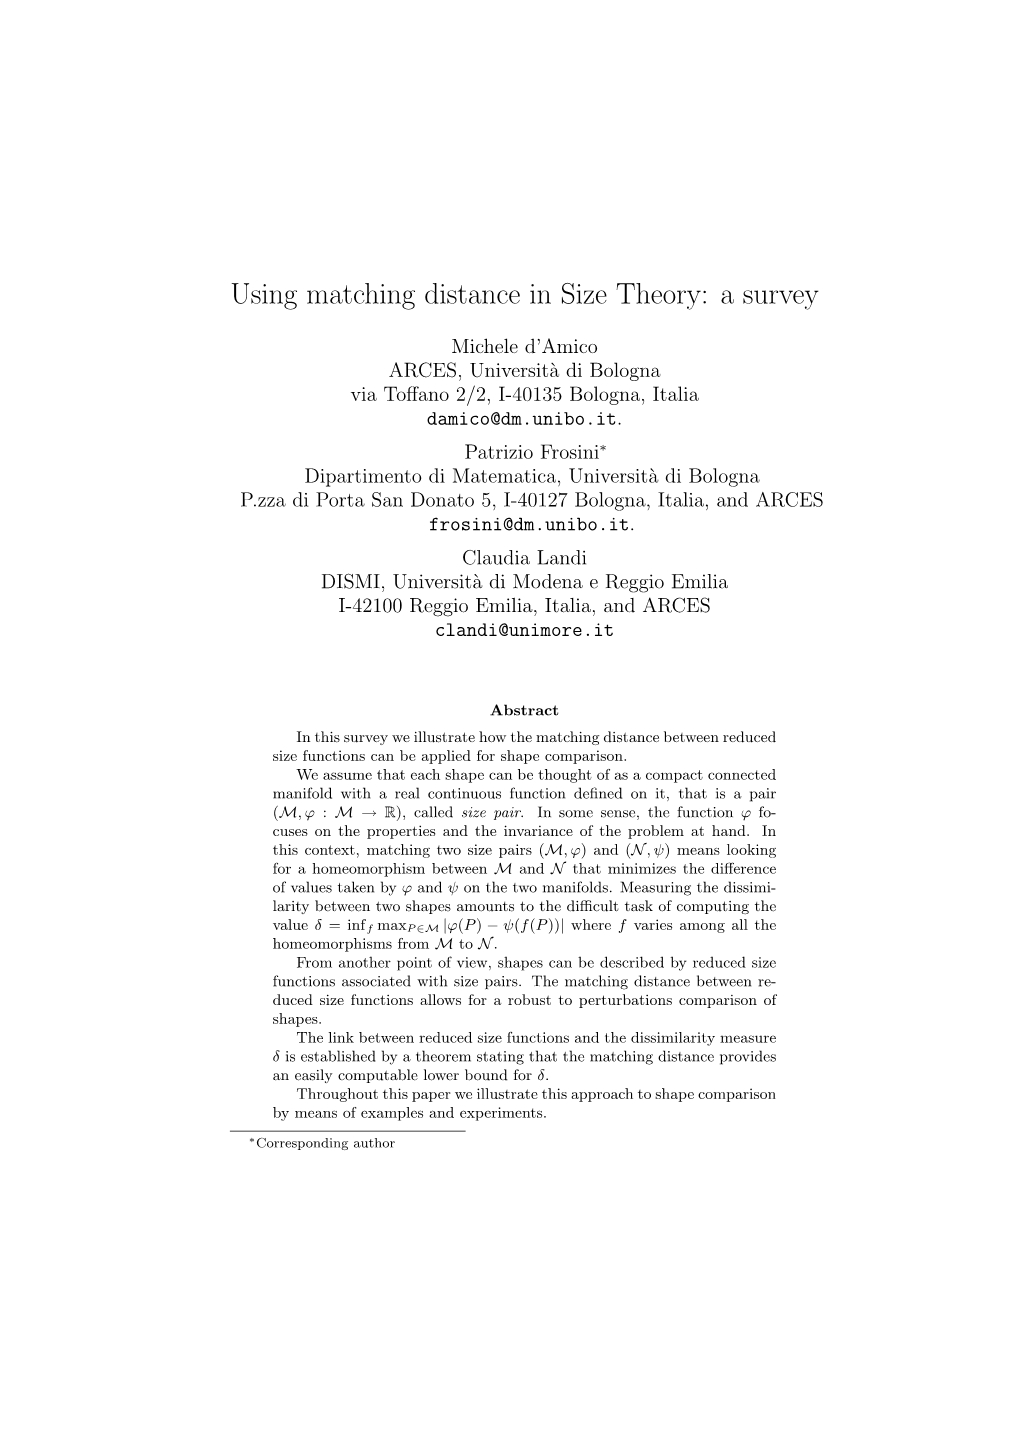 Using Matching Distance in Size Theory: a Survey